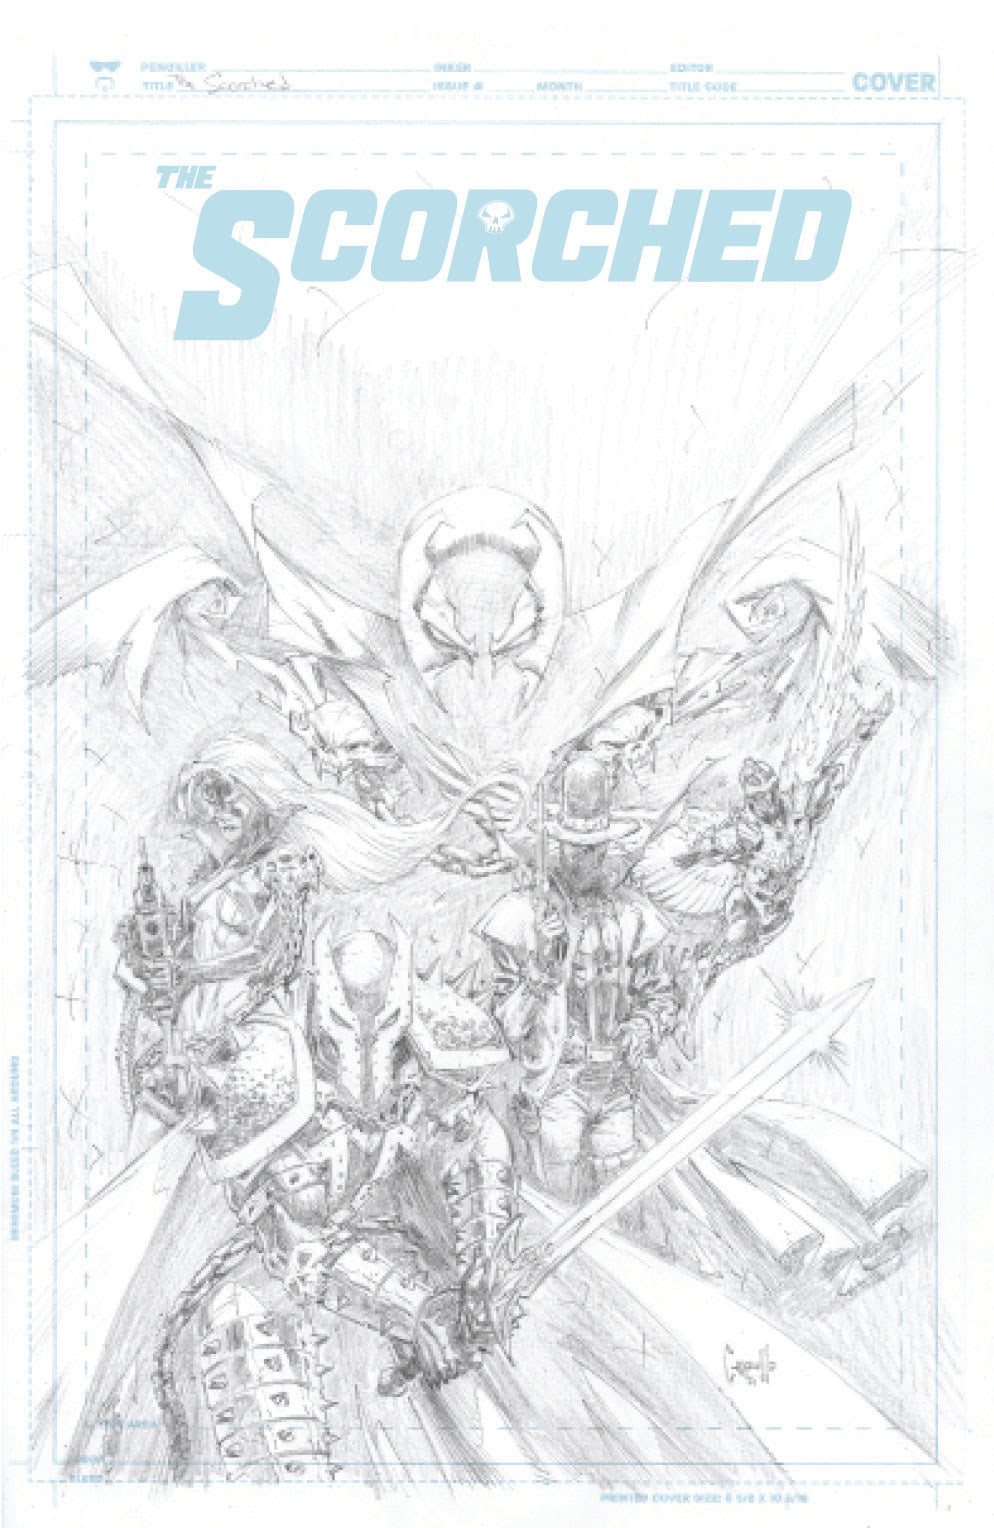 01/12/2022 SPAWN SCORCHED #1 CVR G 1:50 CAPULLO SKETCH VARIANT WITH FREE COVER A-F